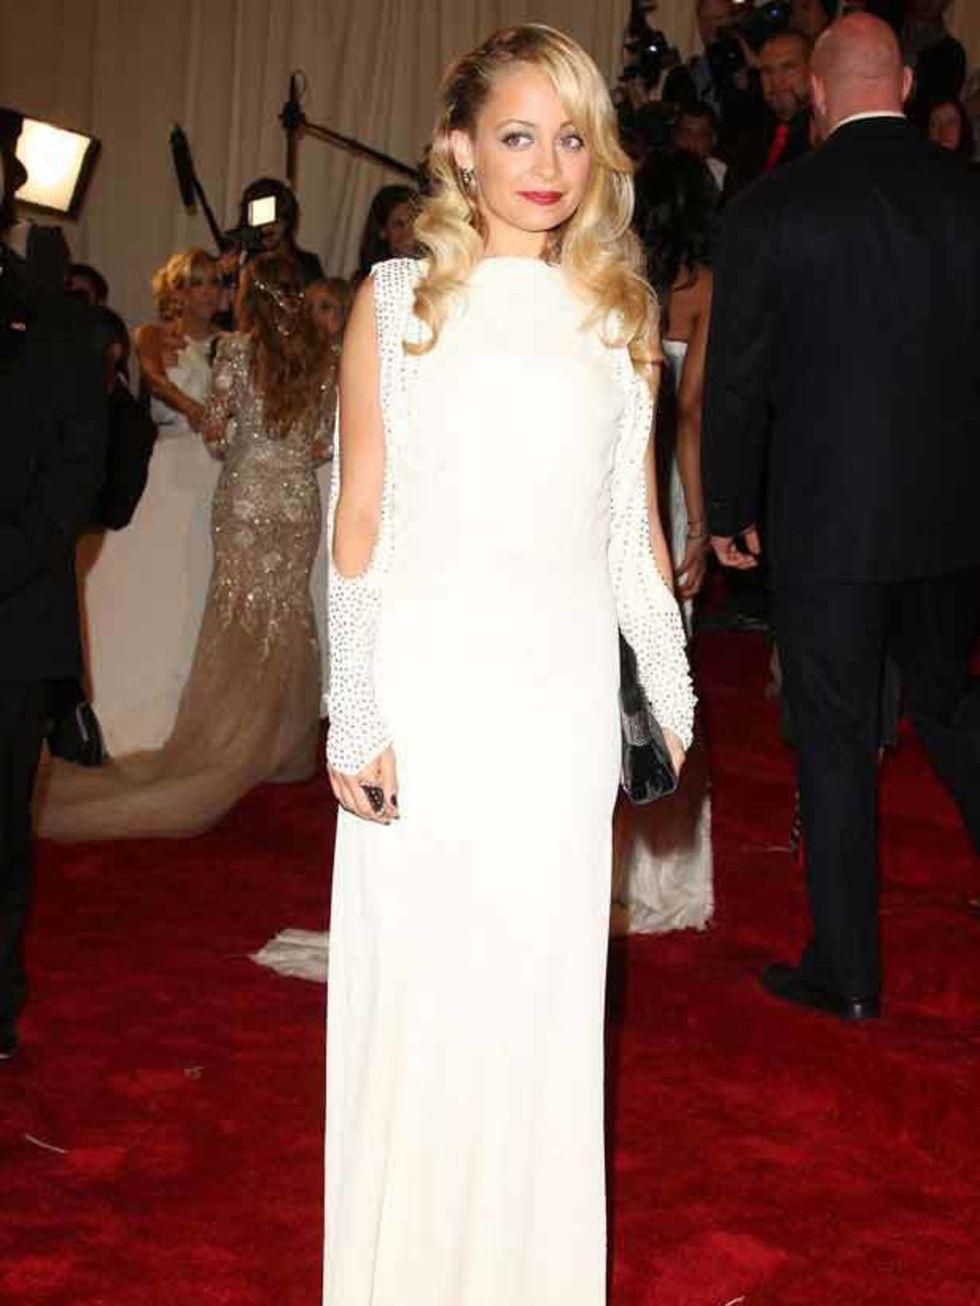 <p>Nicole Richie in a vintage bias cut gown at The Met Ball, 2 May 2011 in <a href="http://www.elleuk.com/travel/travel-guides/new-york-guide">New York</a>.</p>